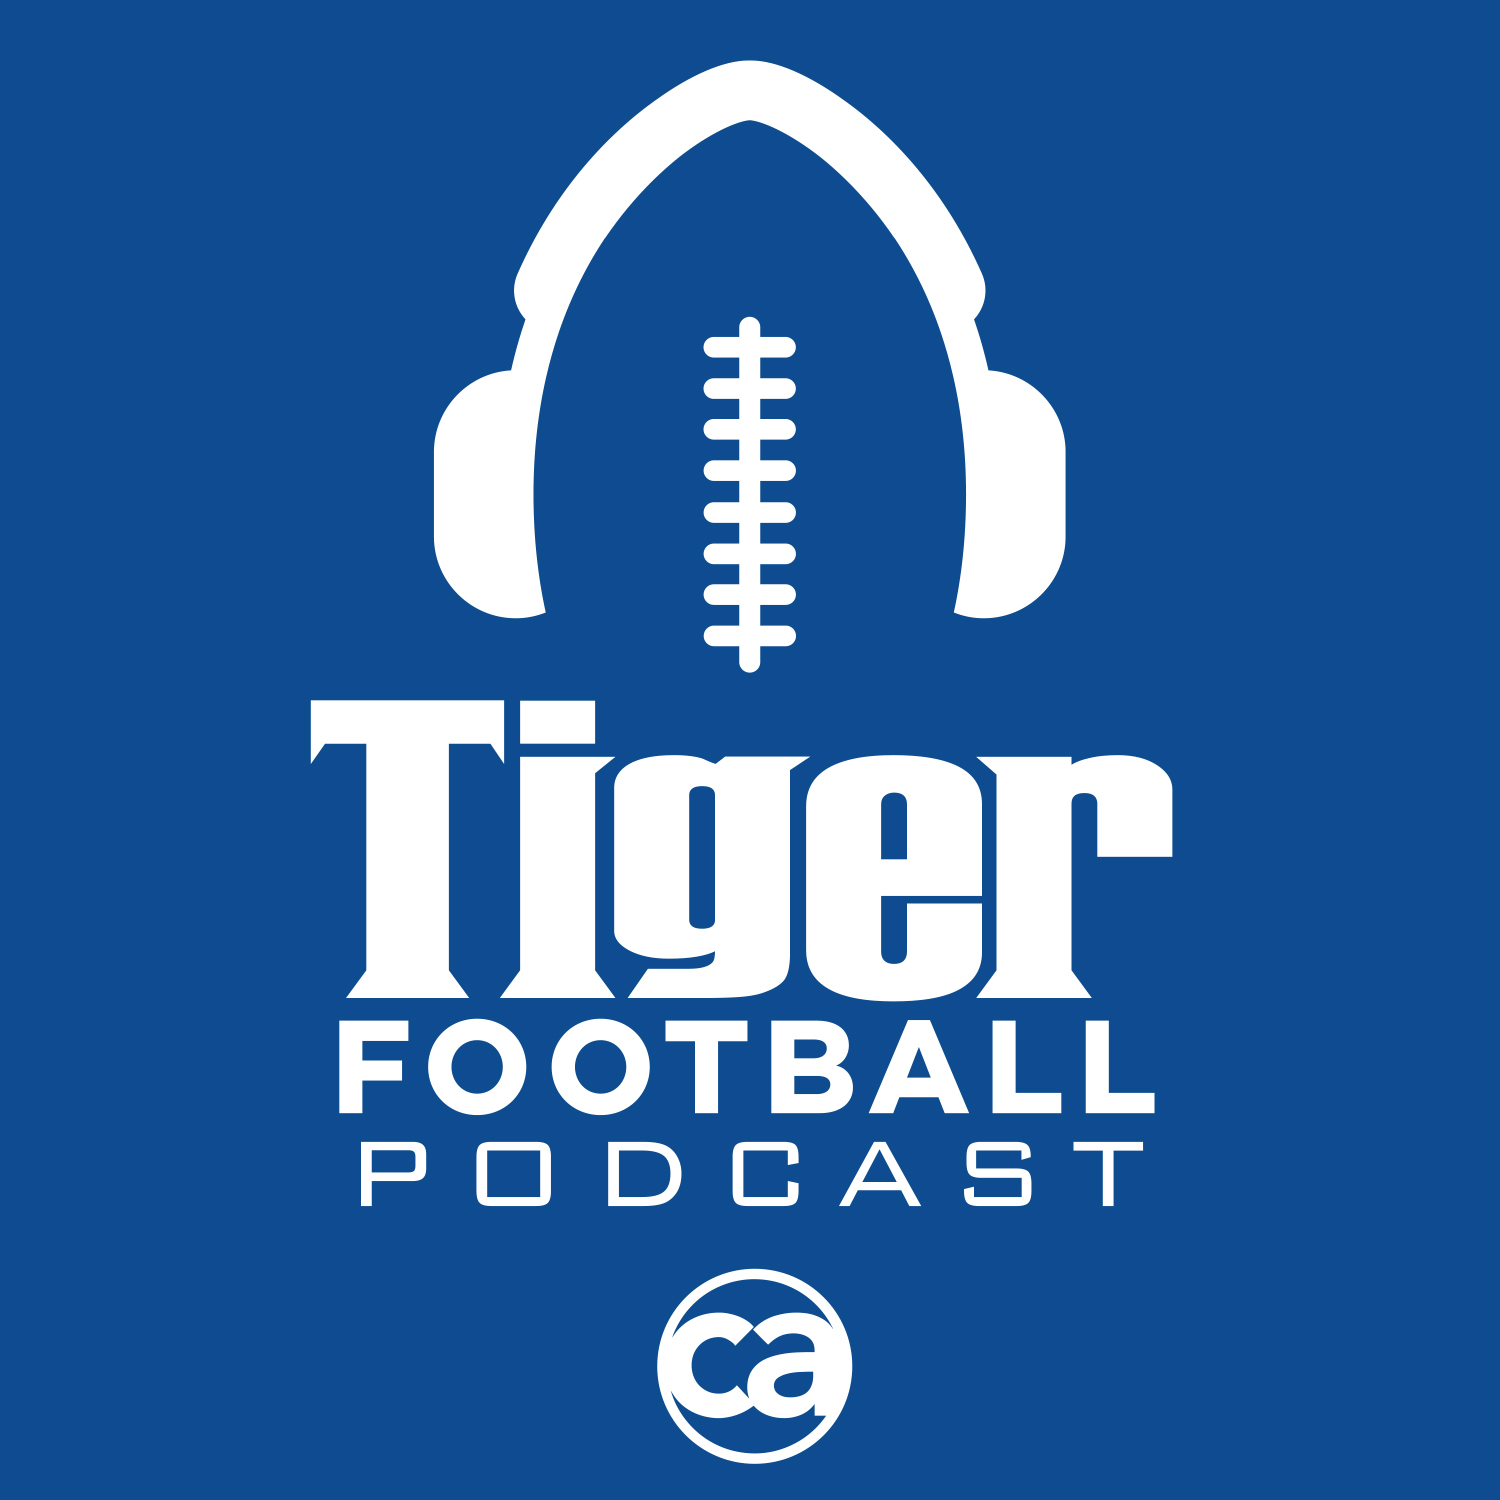 Tiger Football Podcast: Week 4 AAC picks against the line